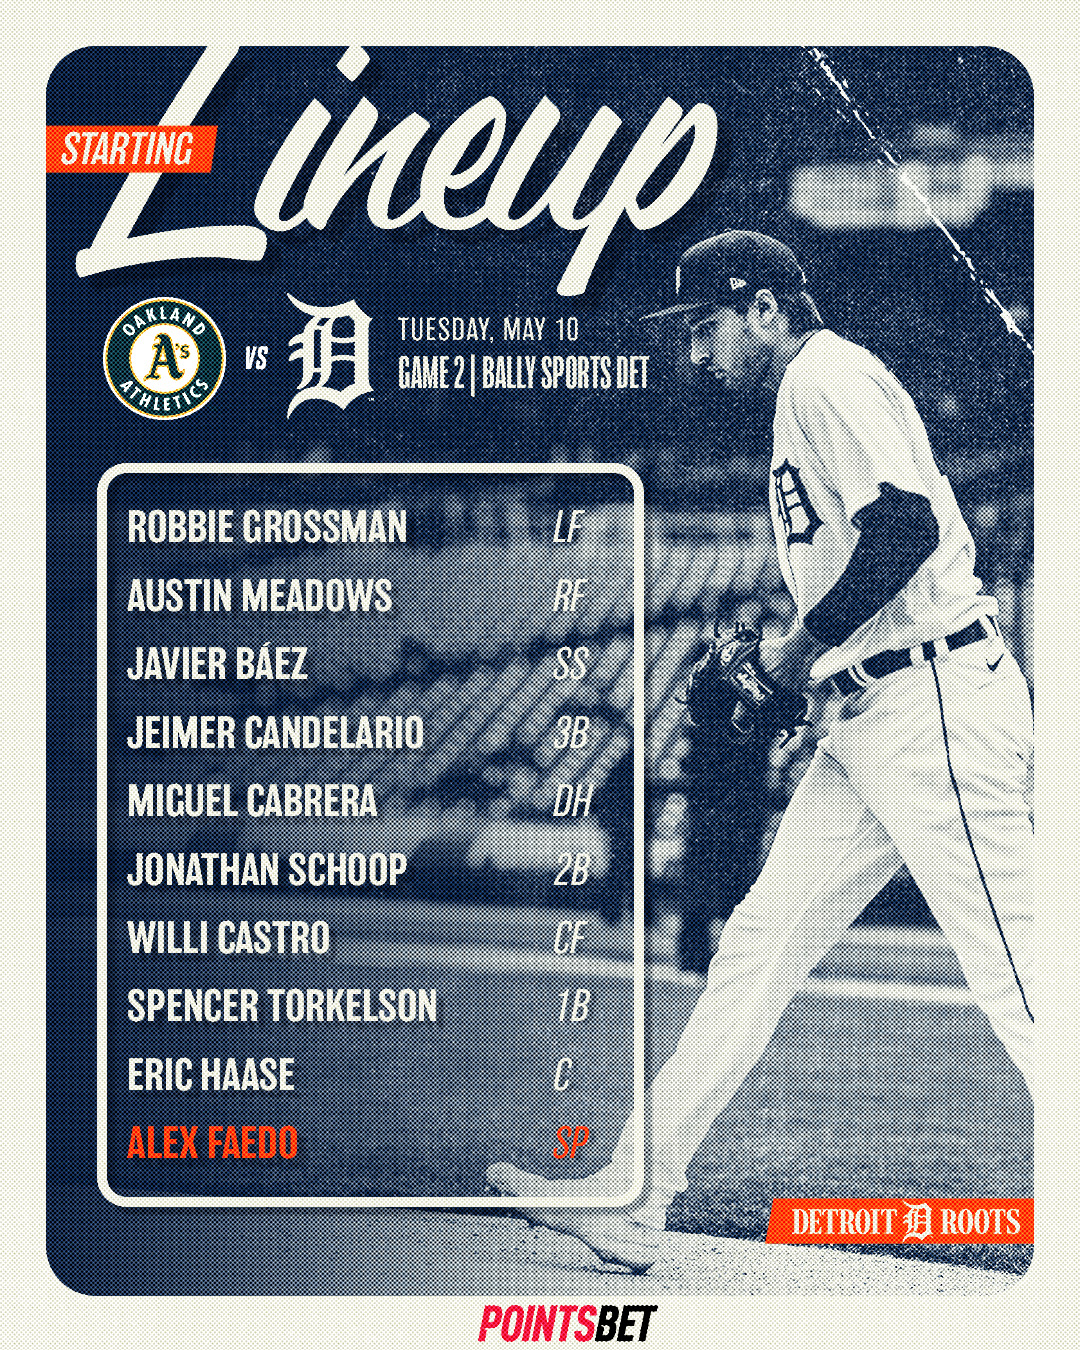 Detroit Tigers on X: Here's how we line up for Game 2 against the